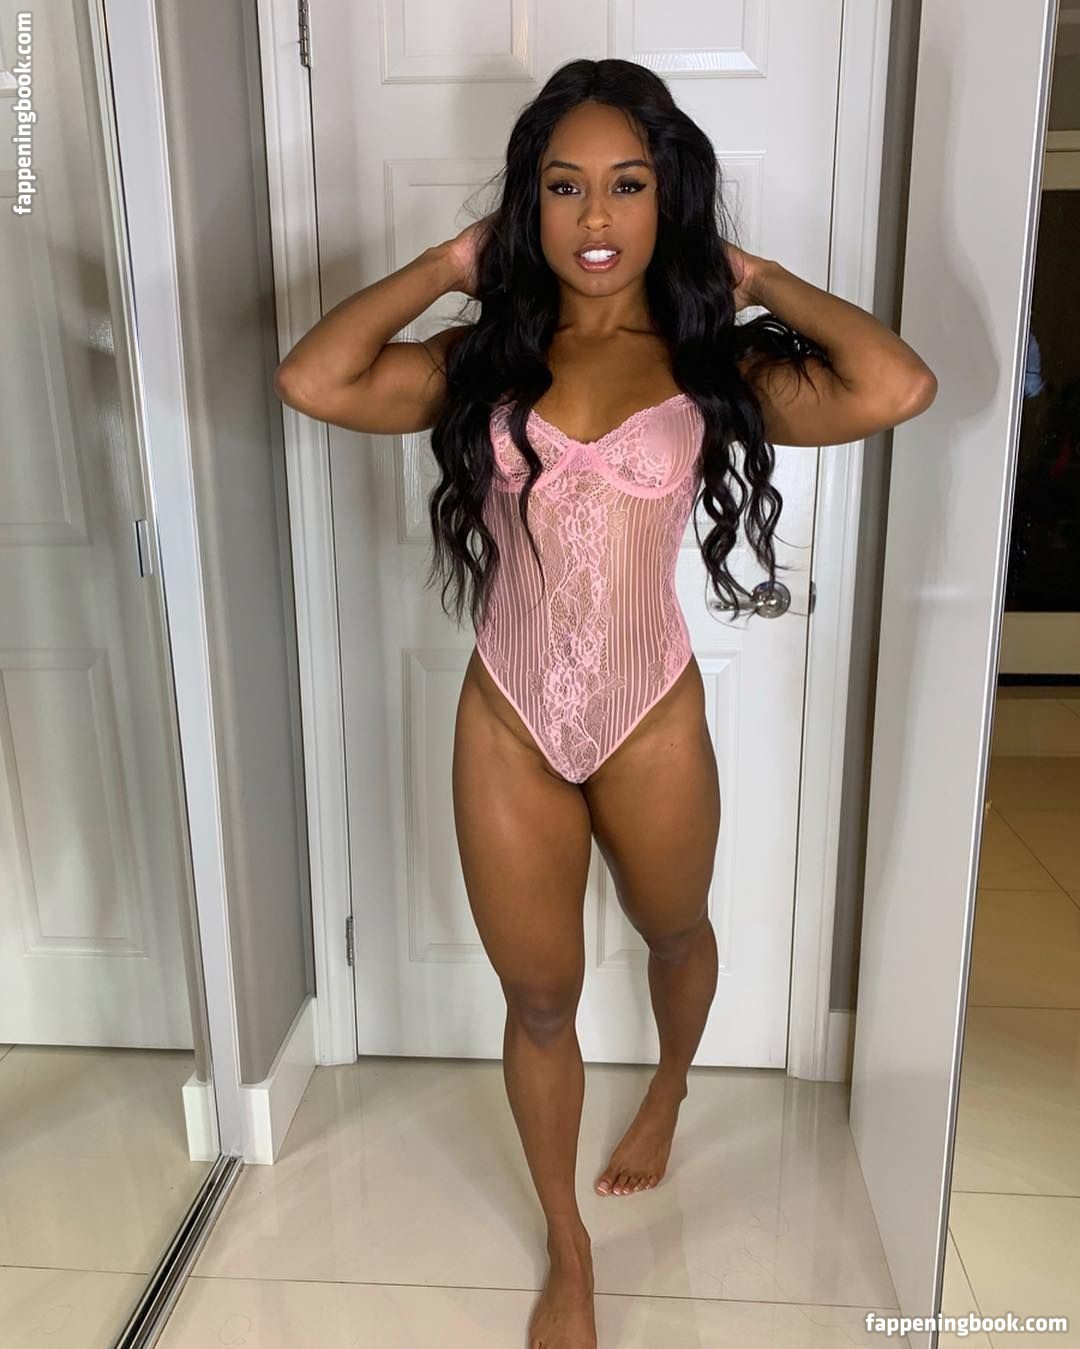 Qimmah russo onlyfans nude